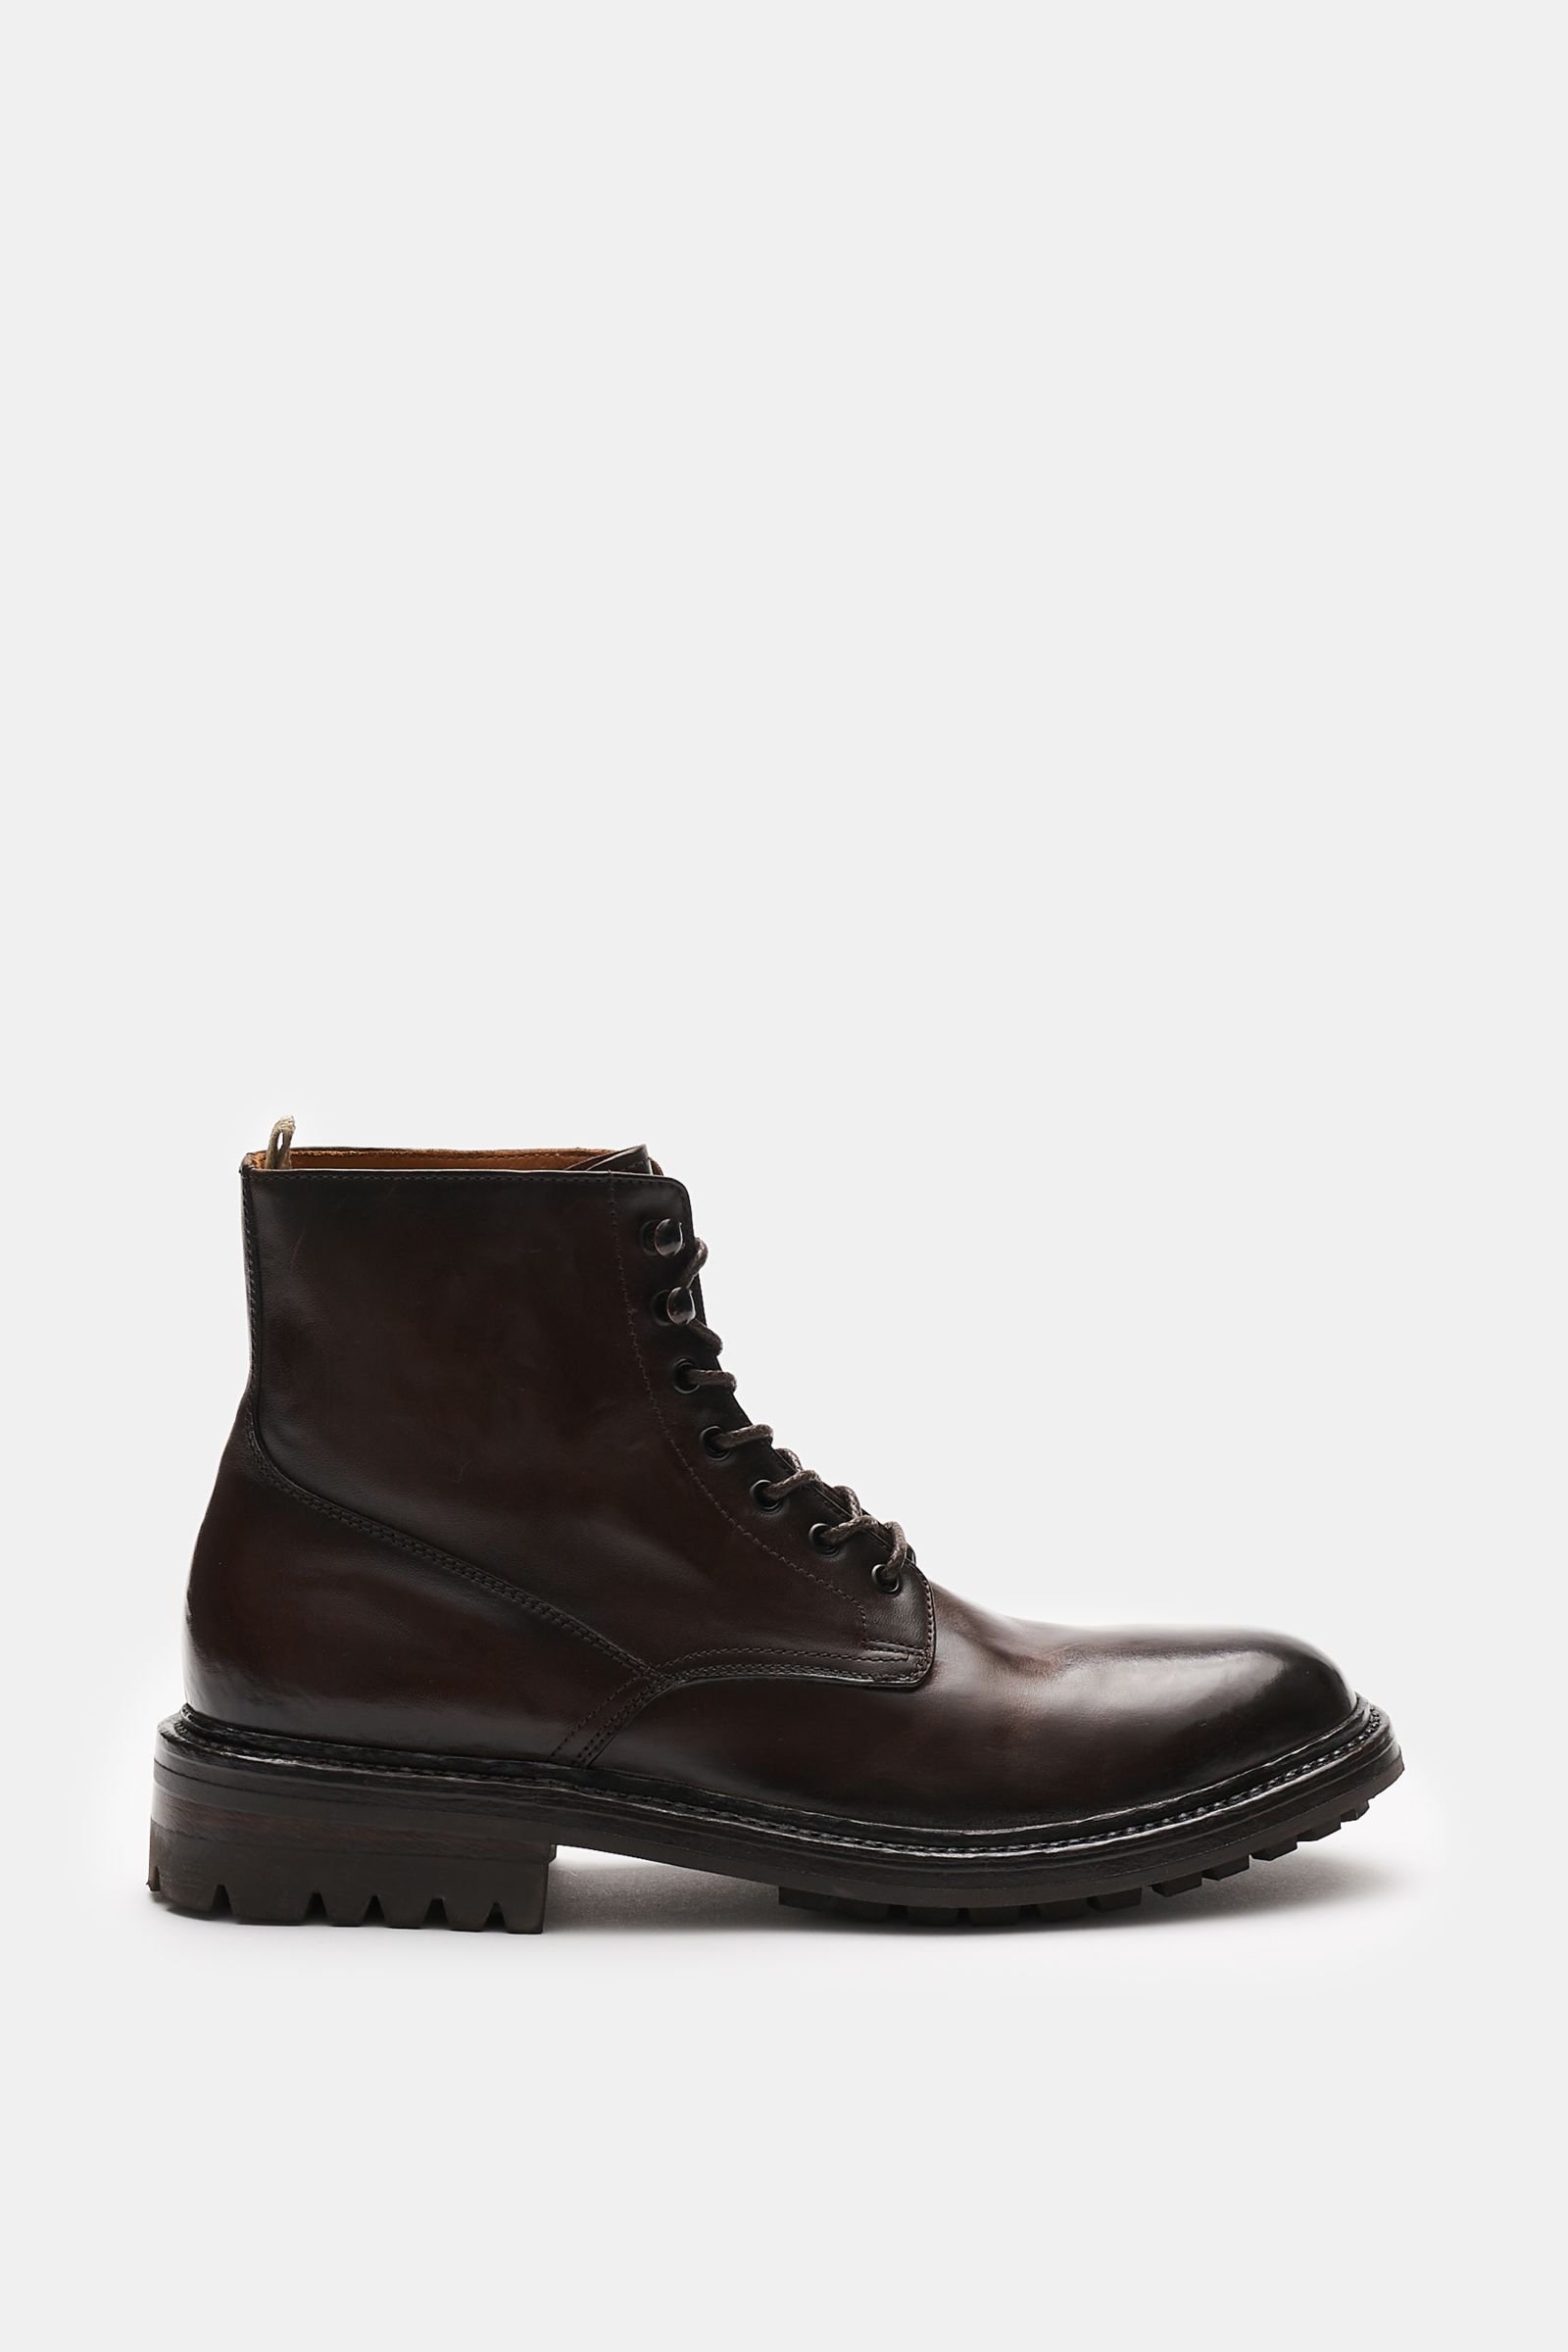 Lace-up boots 'Sheffield 19' dark brown